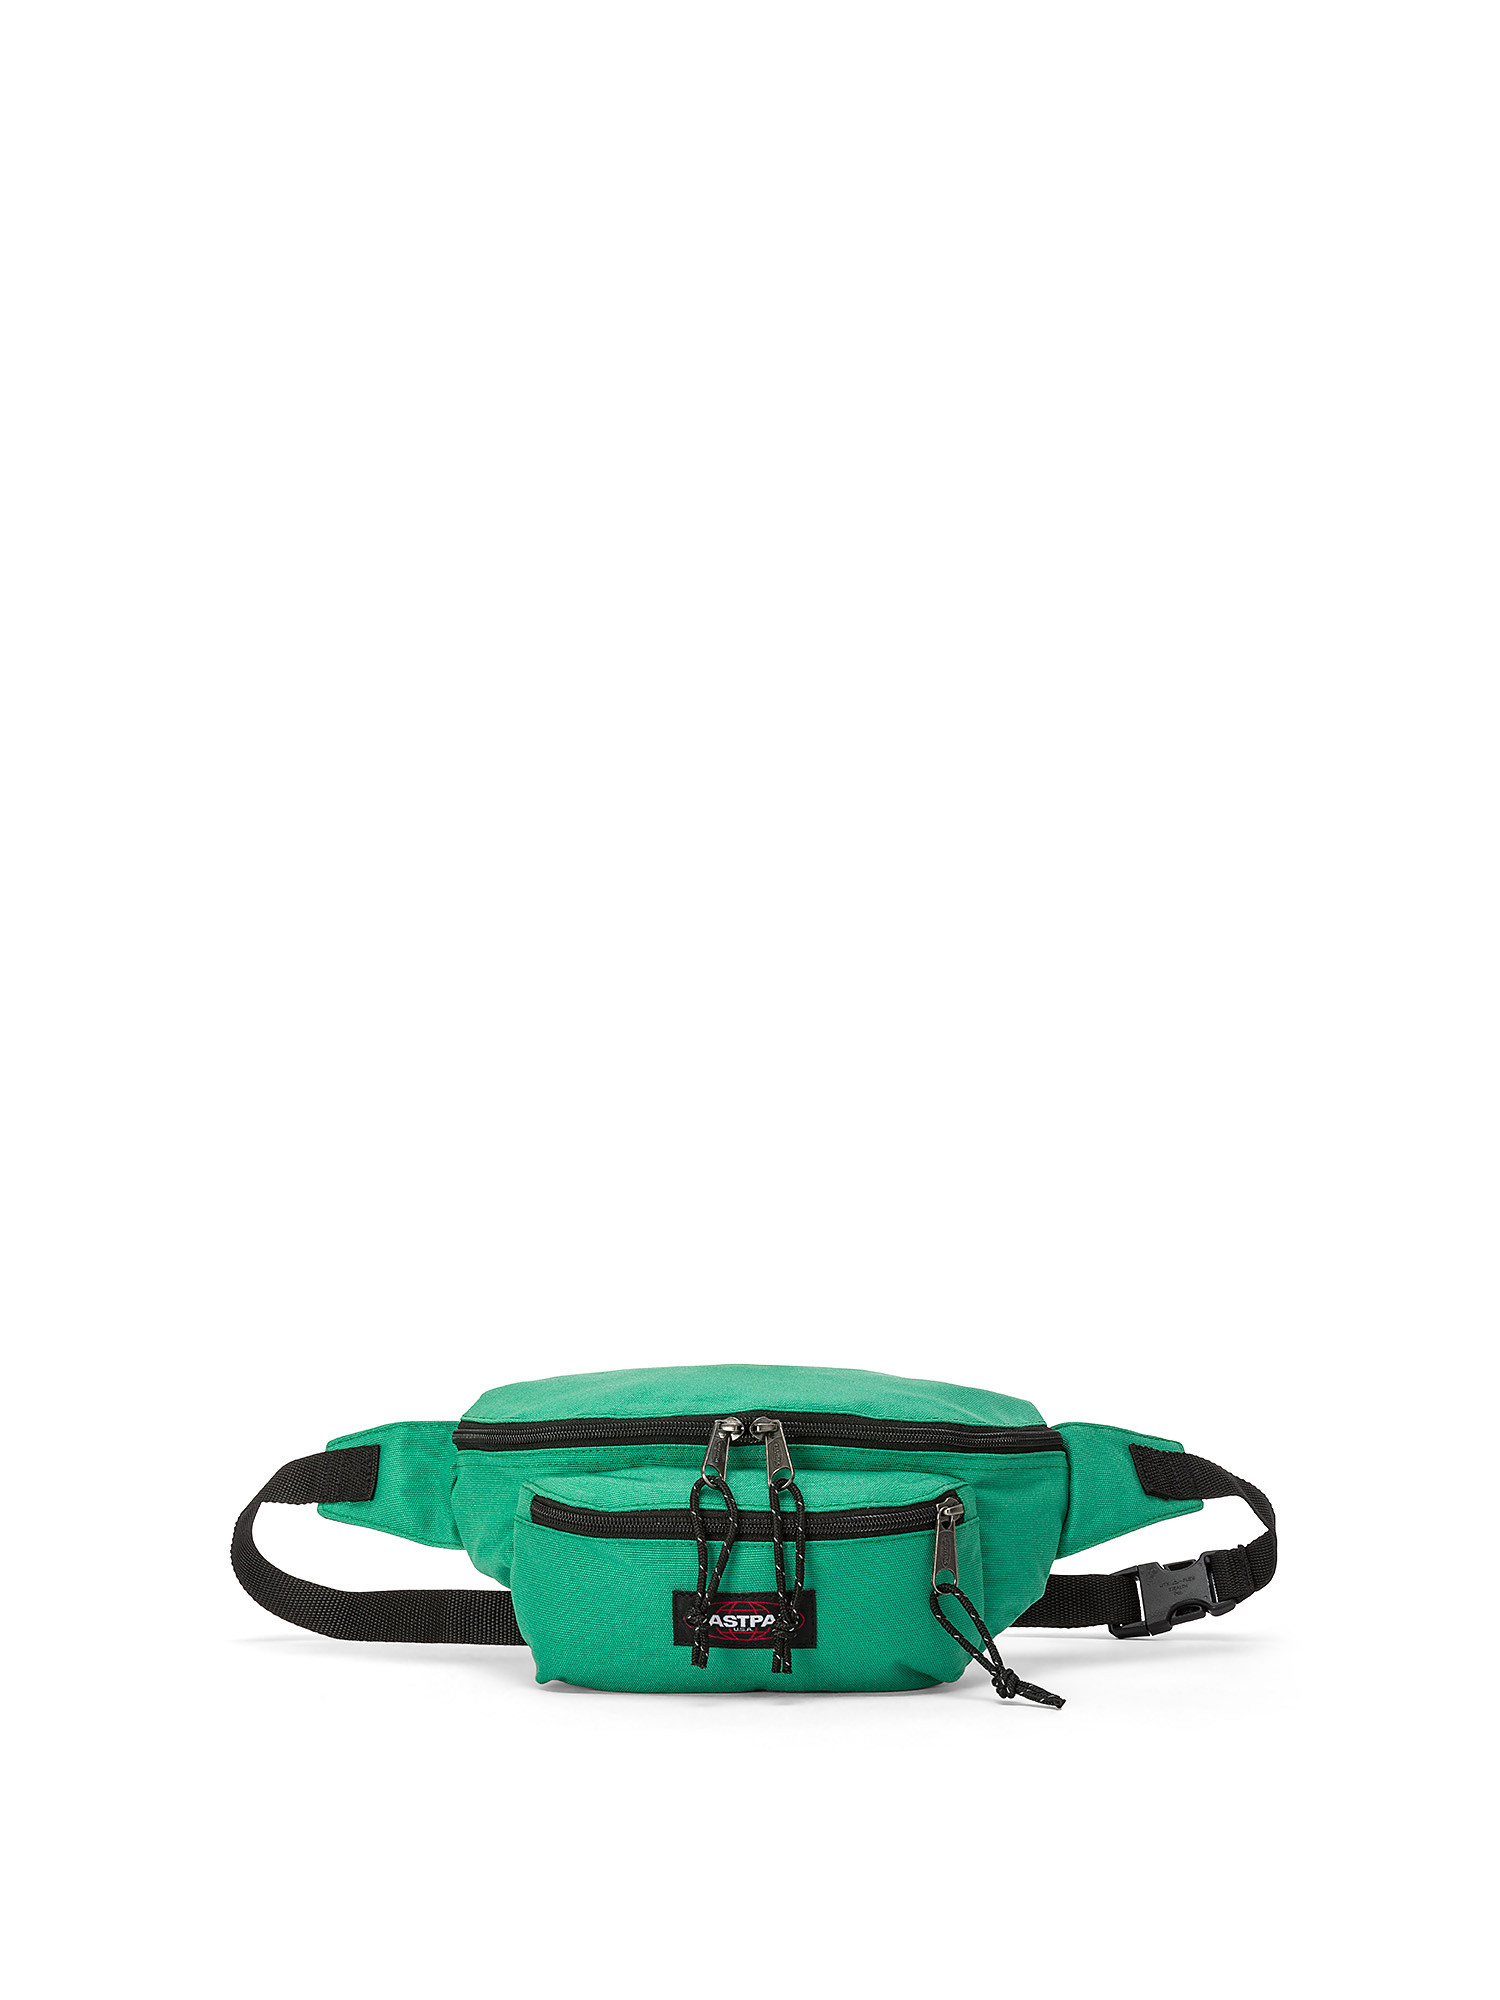 Eastpak - Pouch Doggy Bag Grass Green, Green, large image number 0